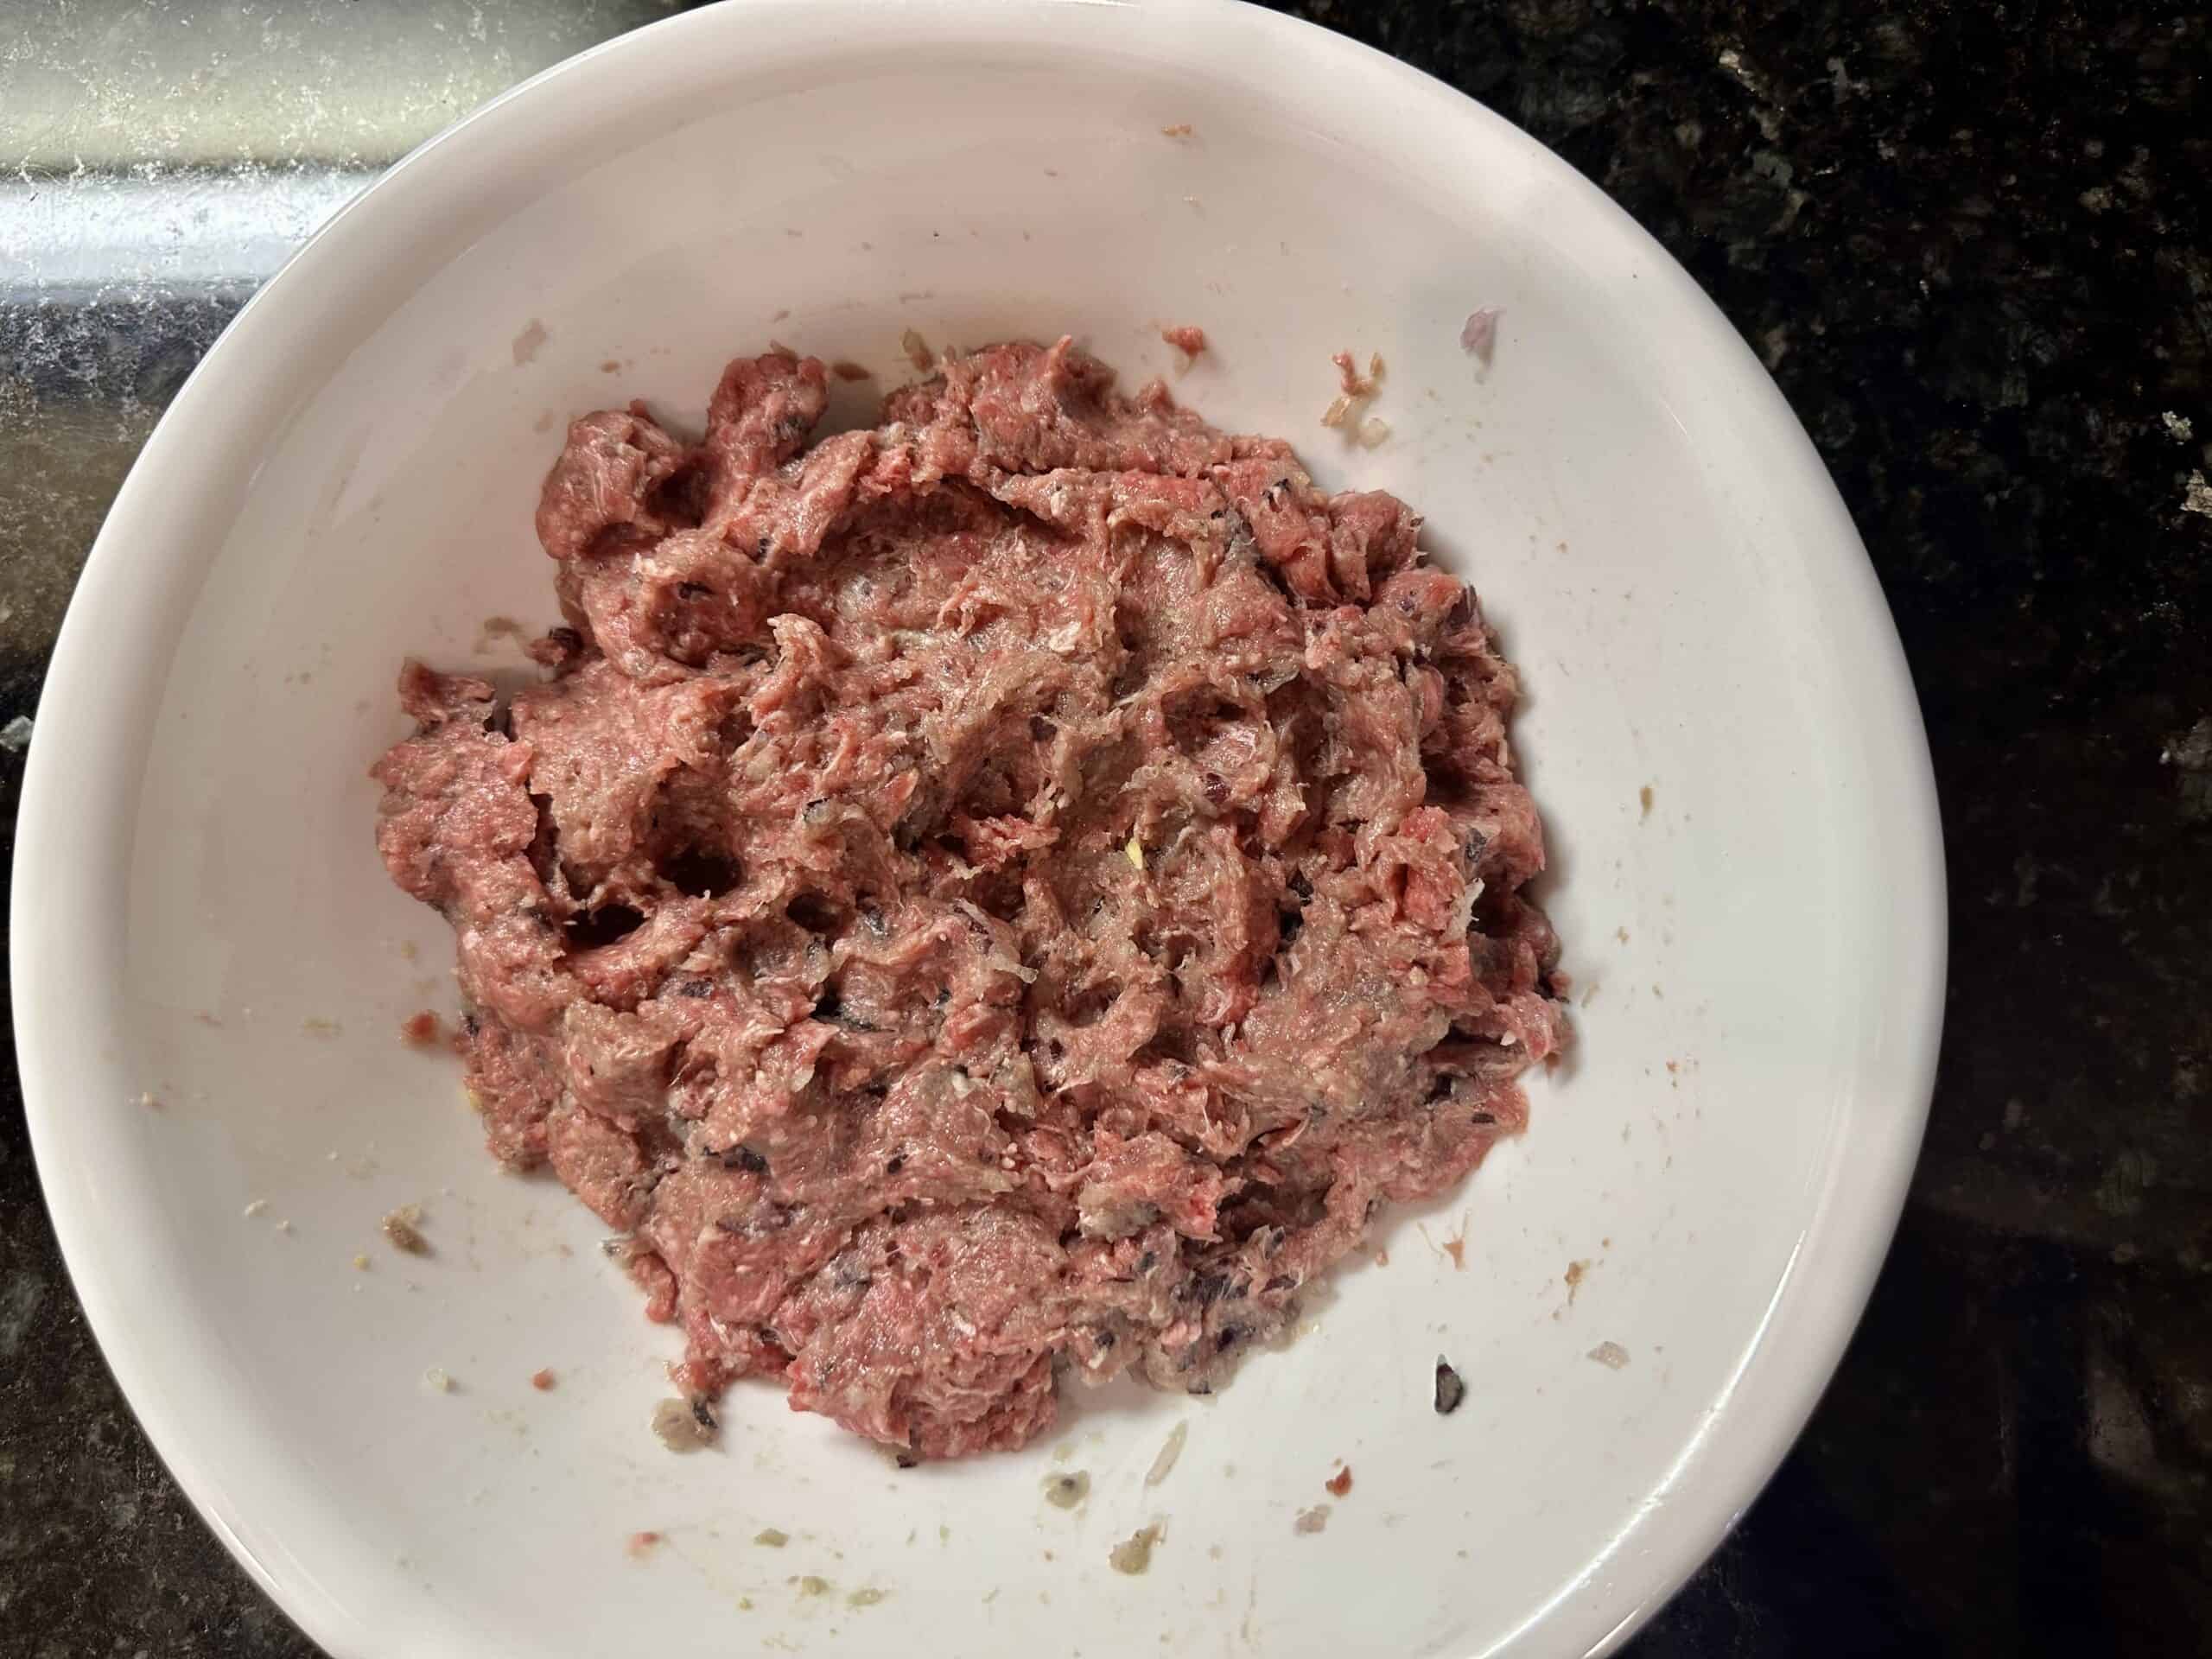 Mixed lean ground beef with onion and seasoning in a white bowl